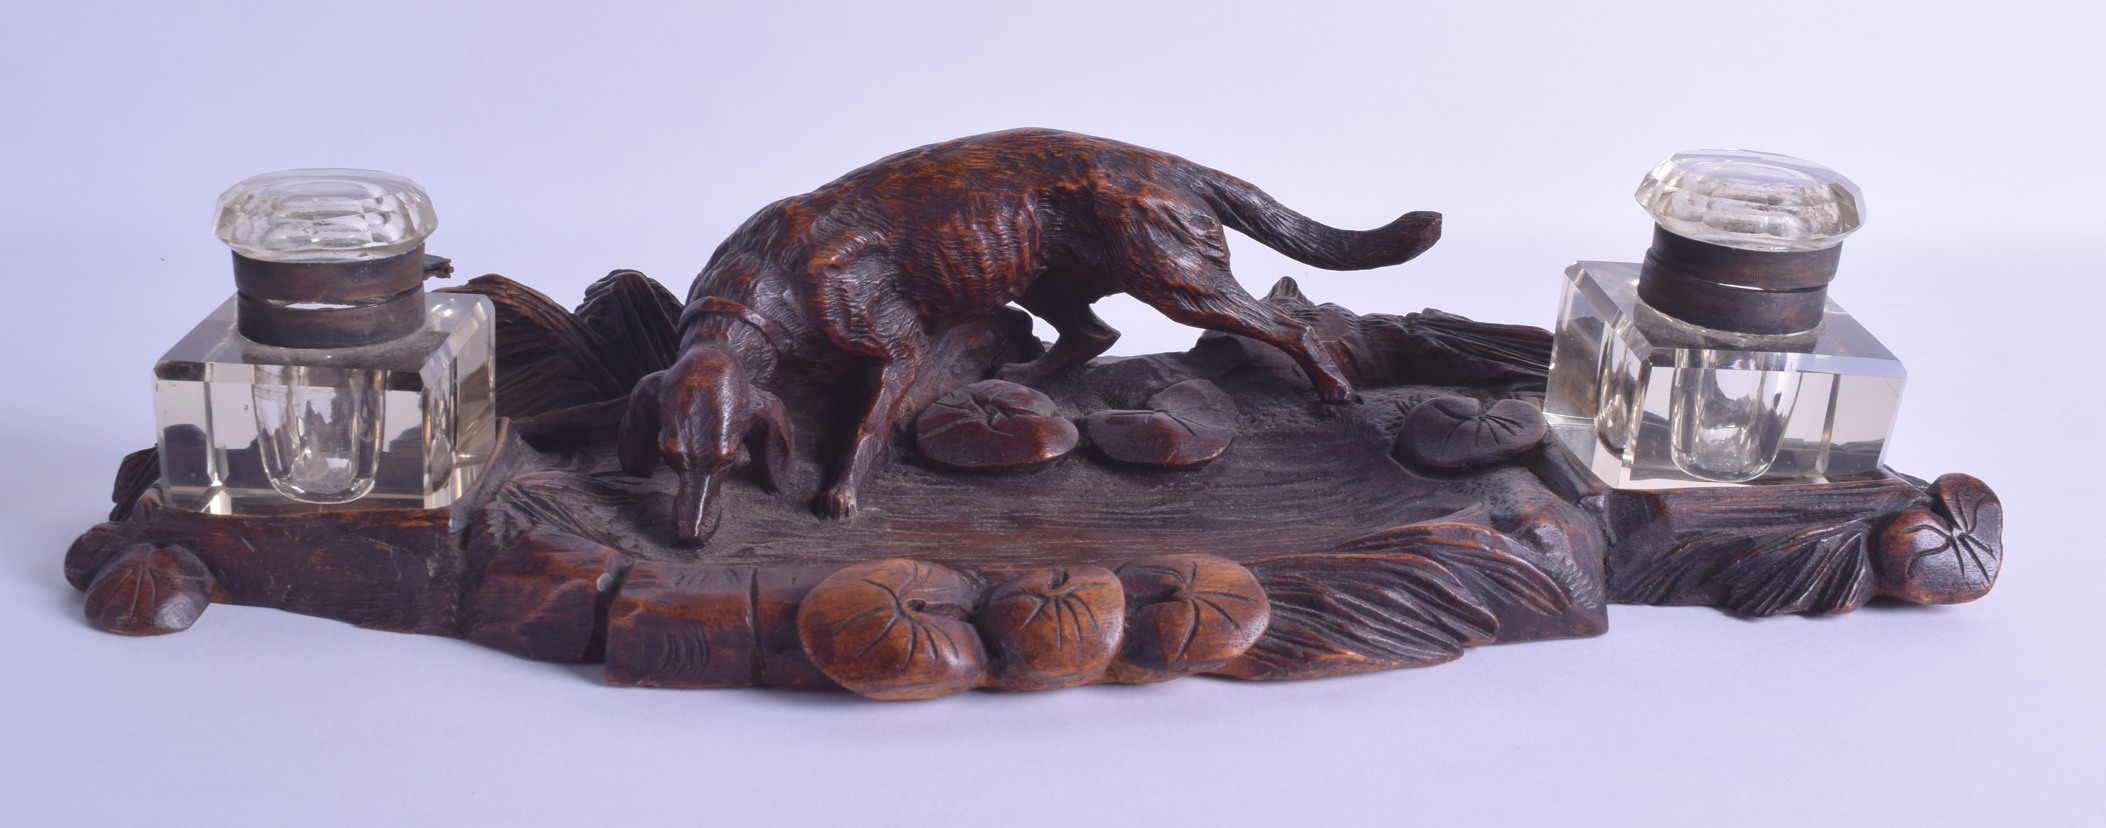 A LATE 19TH CENTURY BAVARIAN BLACK FOREST CARVED INKWELL modelled with a hound drinking water from a